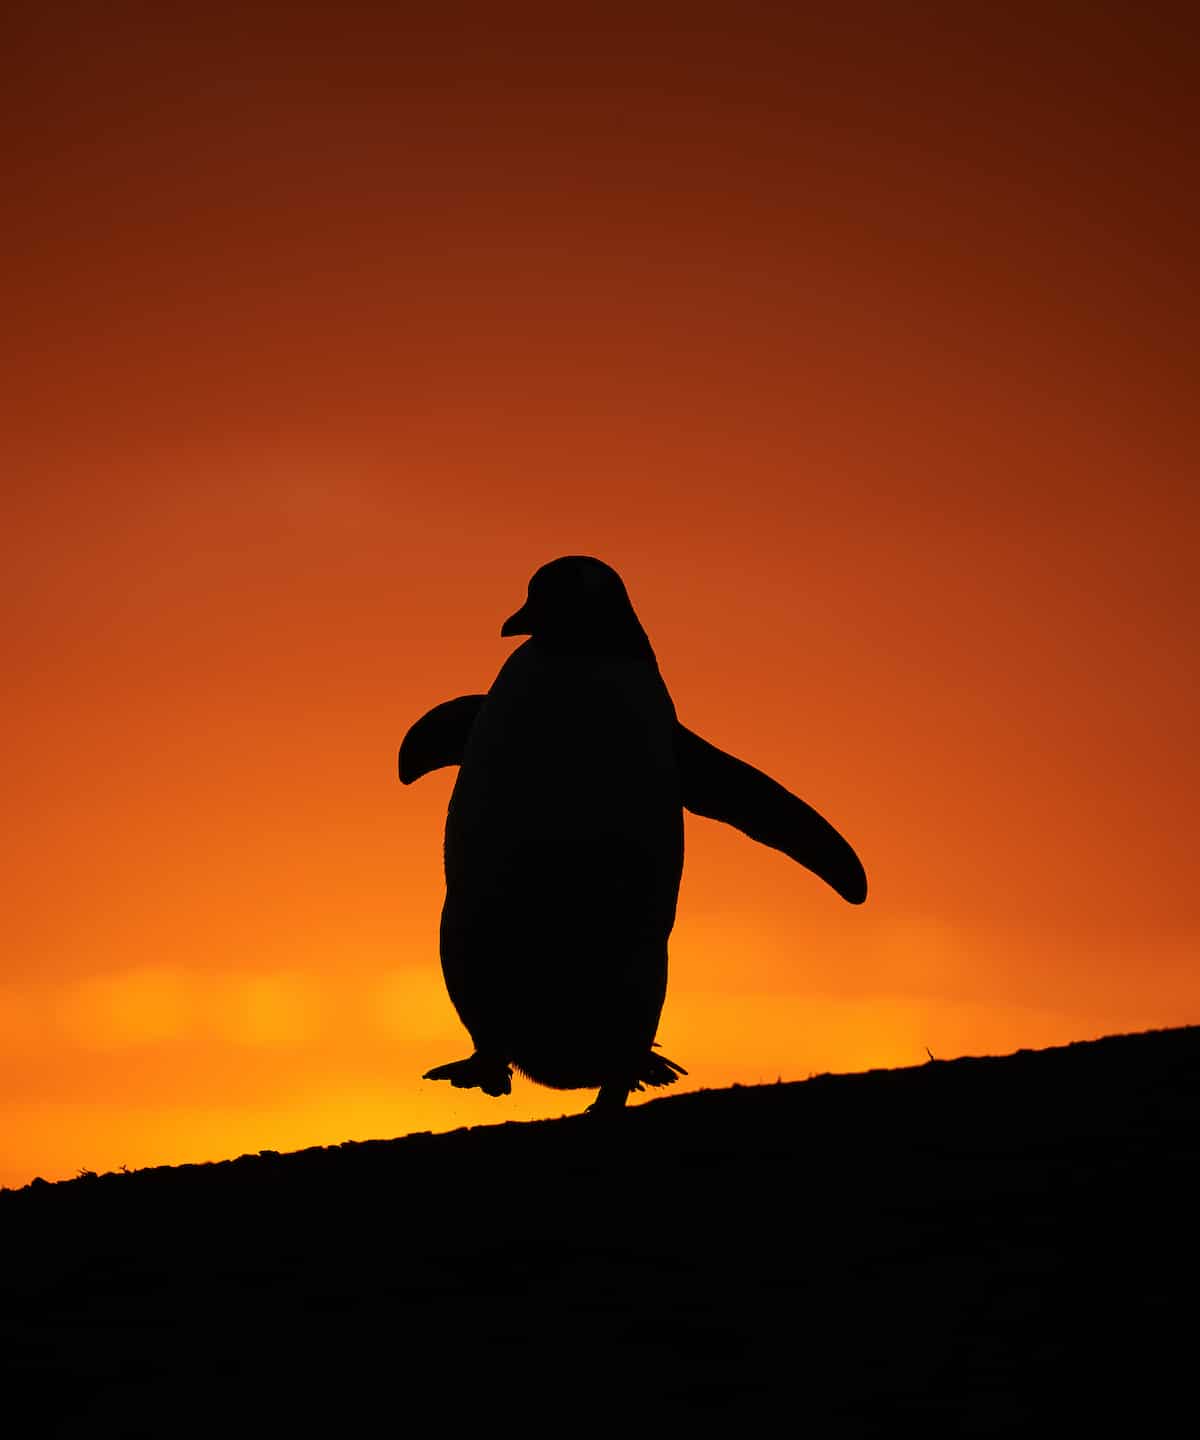 Gentoo Penguin in Silhouette Against the Sunset